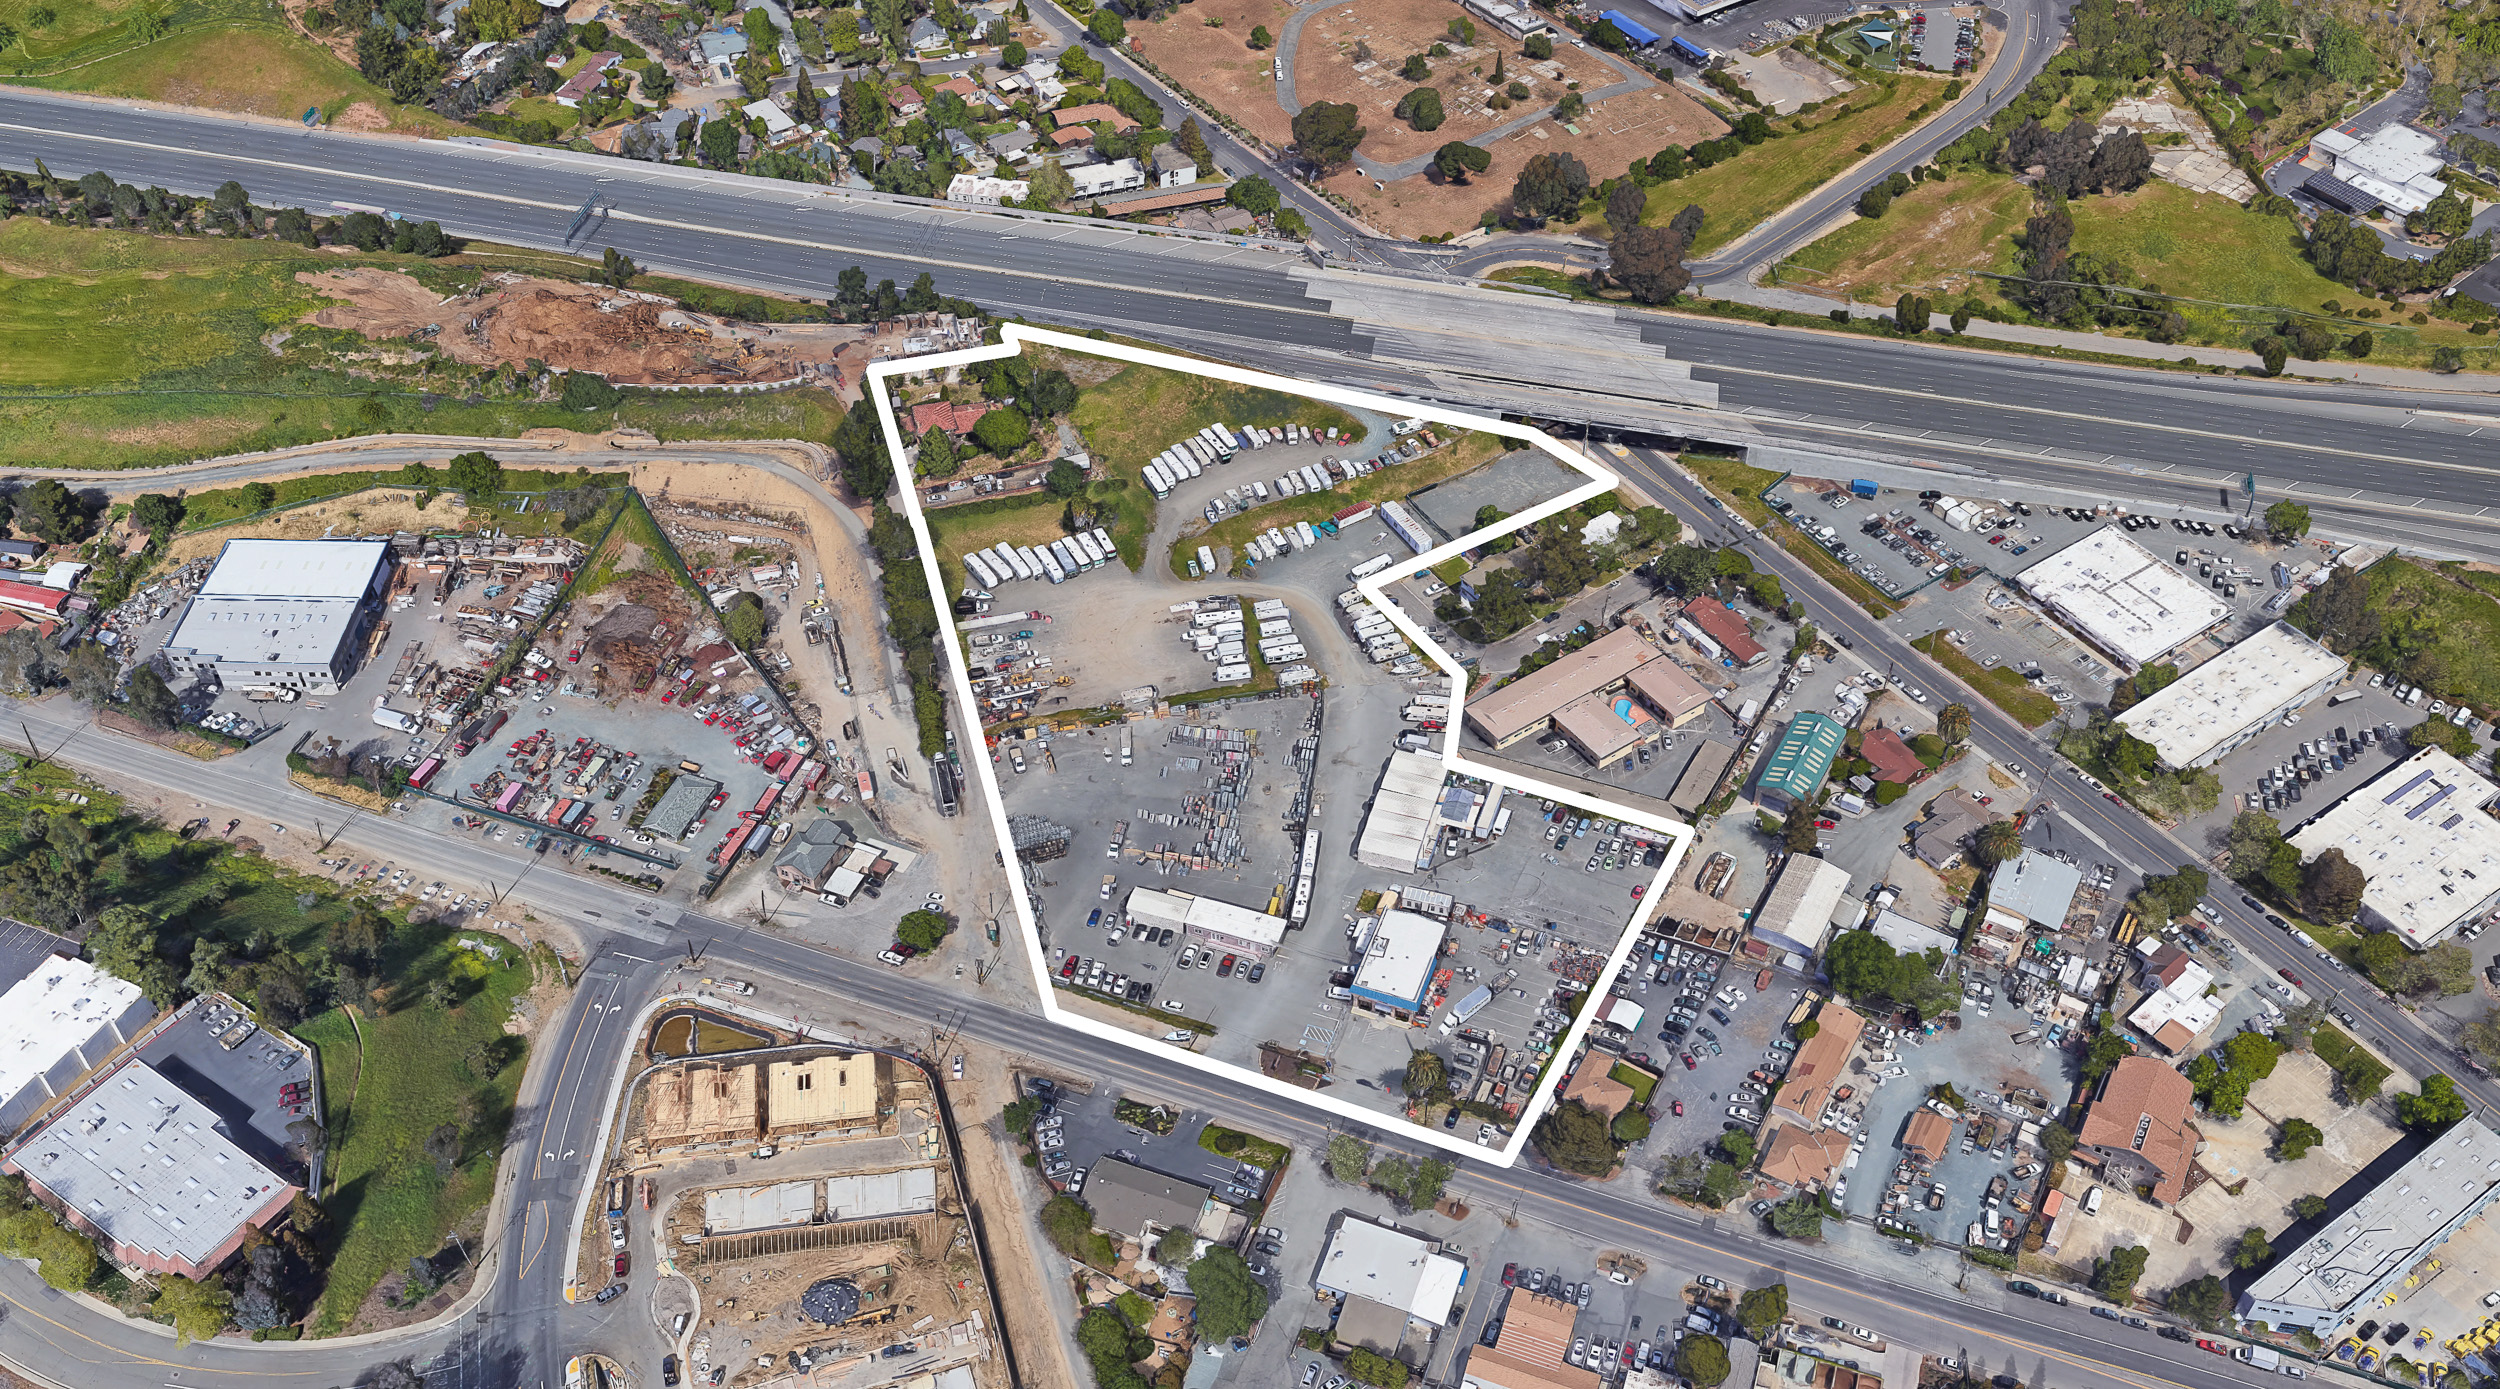 4961 Pacheco Boulevard approximately outlined by YIMBY including the propery at 4949 Pacheco, image via Google Satellite